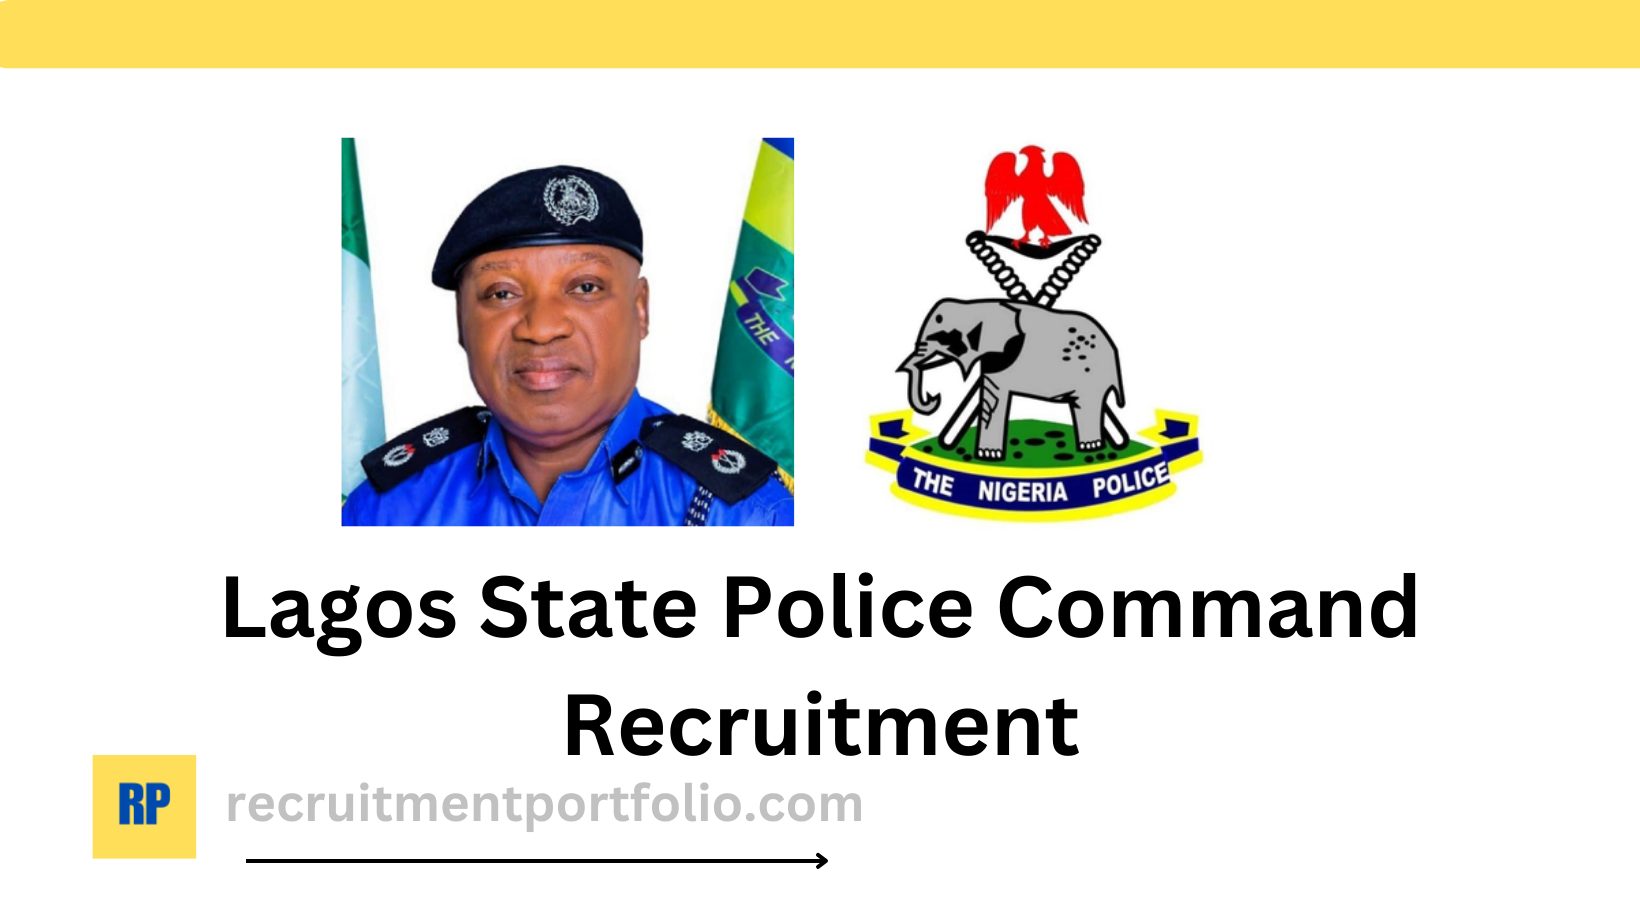 Lagos State Police Command Recruitment